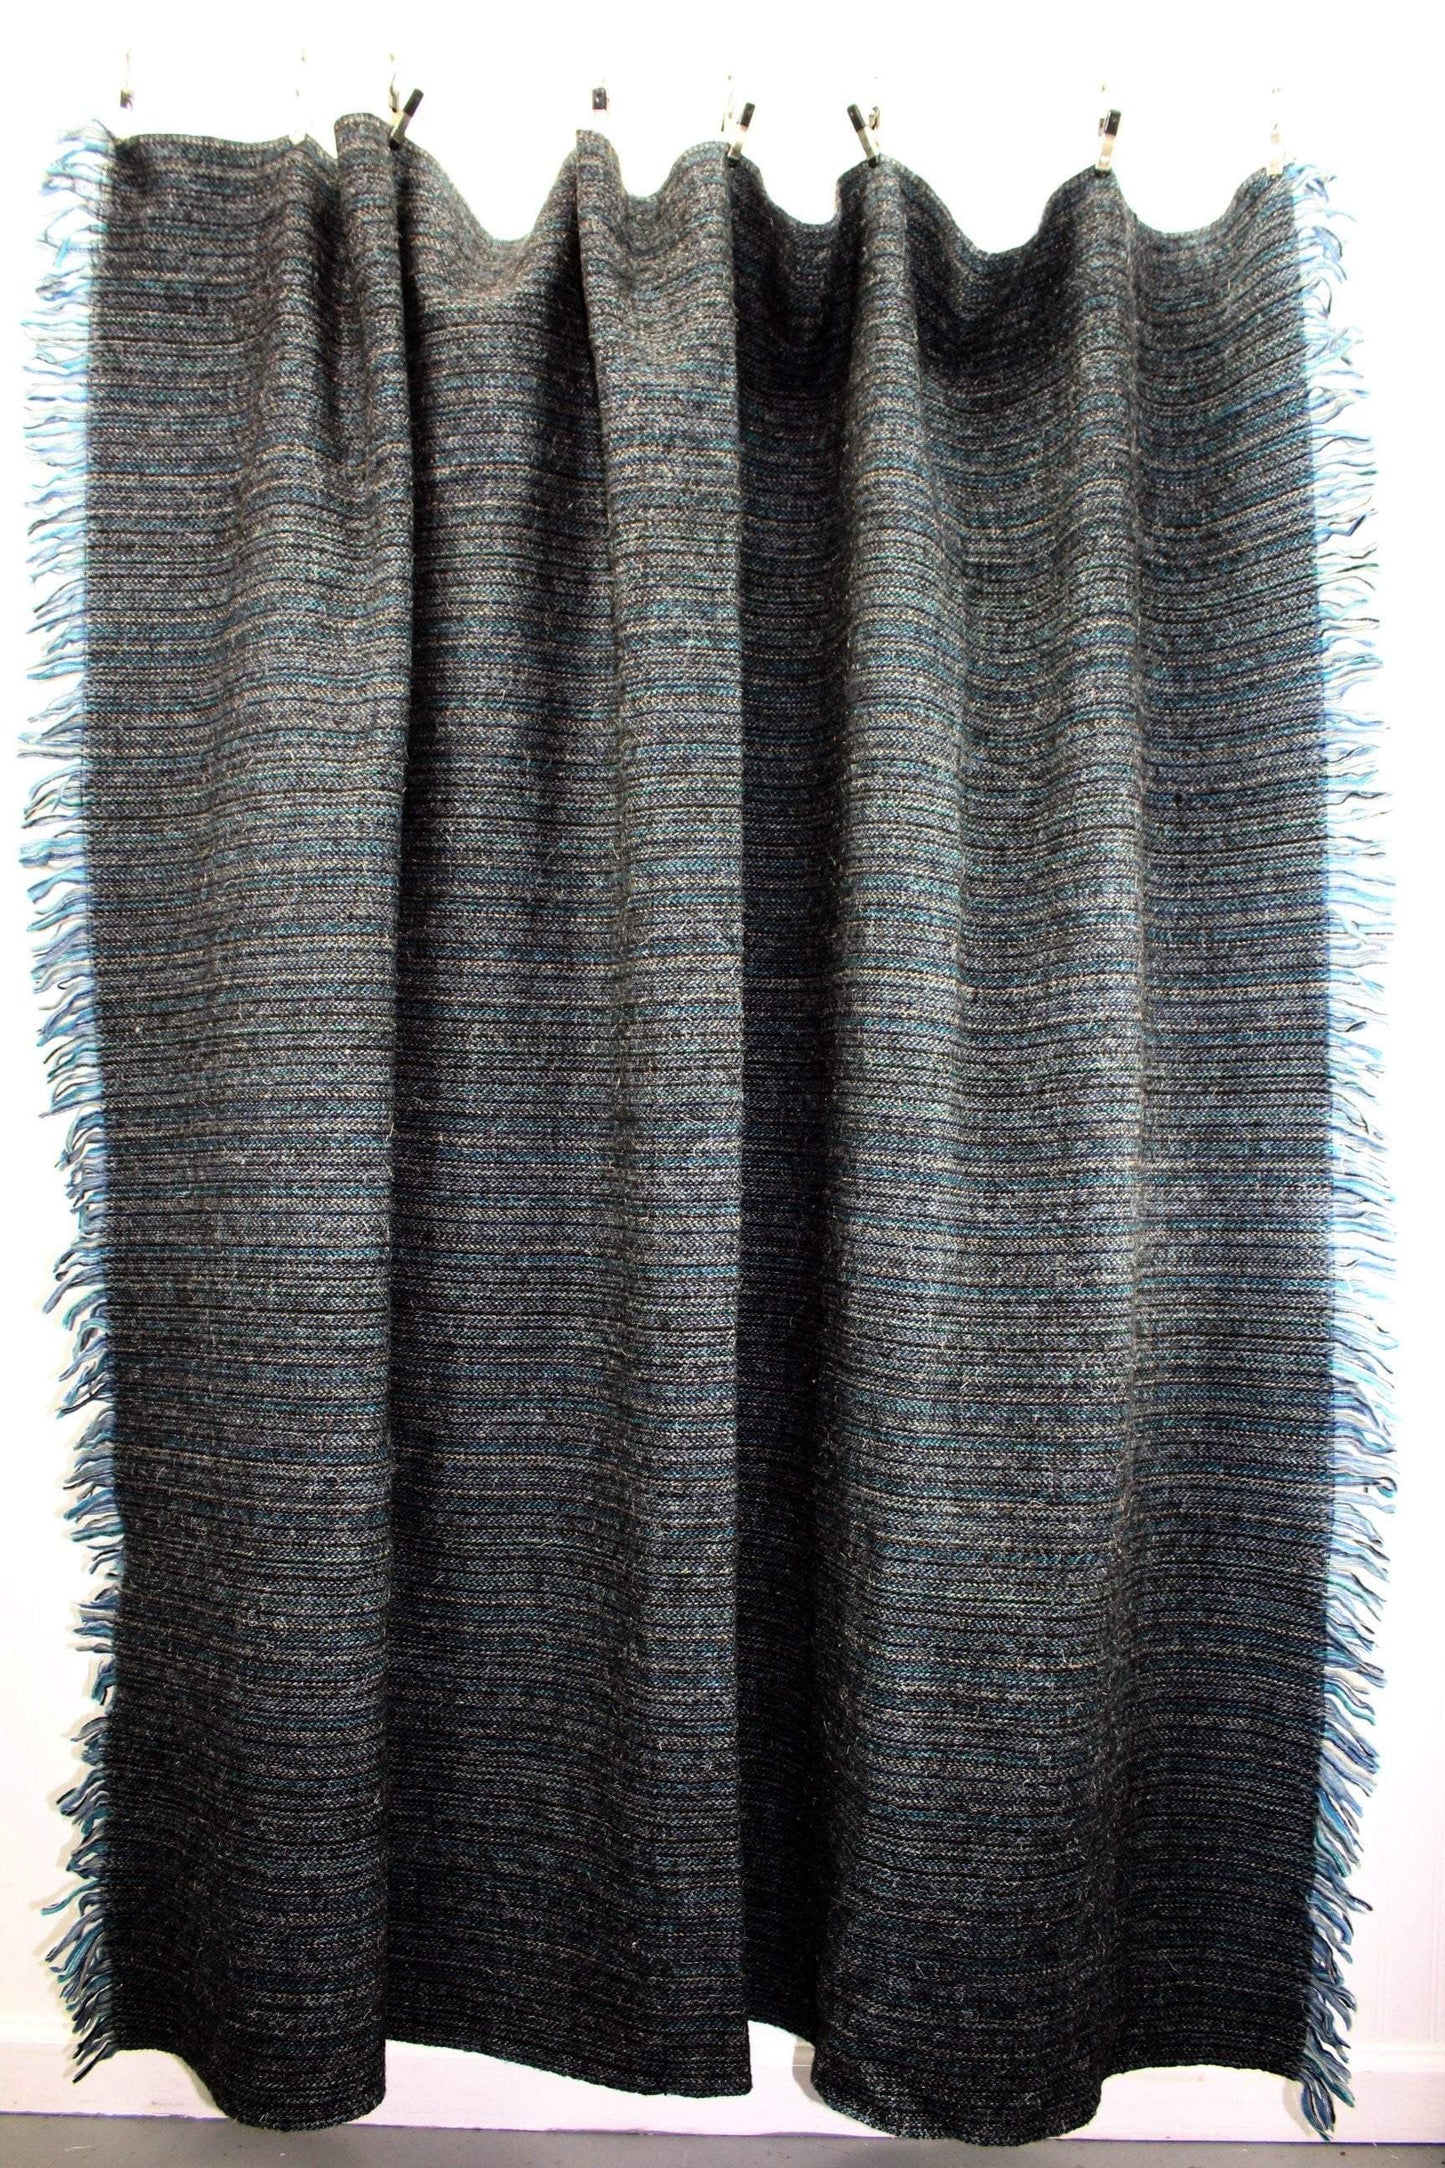 Handsome Wool Throw Blanket Shades of Blue Mixed Linear Woven Fiber 61" X 64" + Fringe decorator item